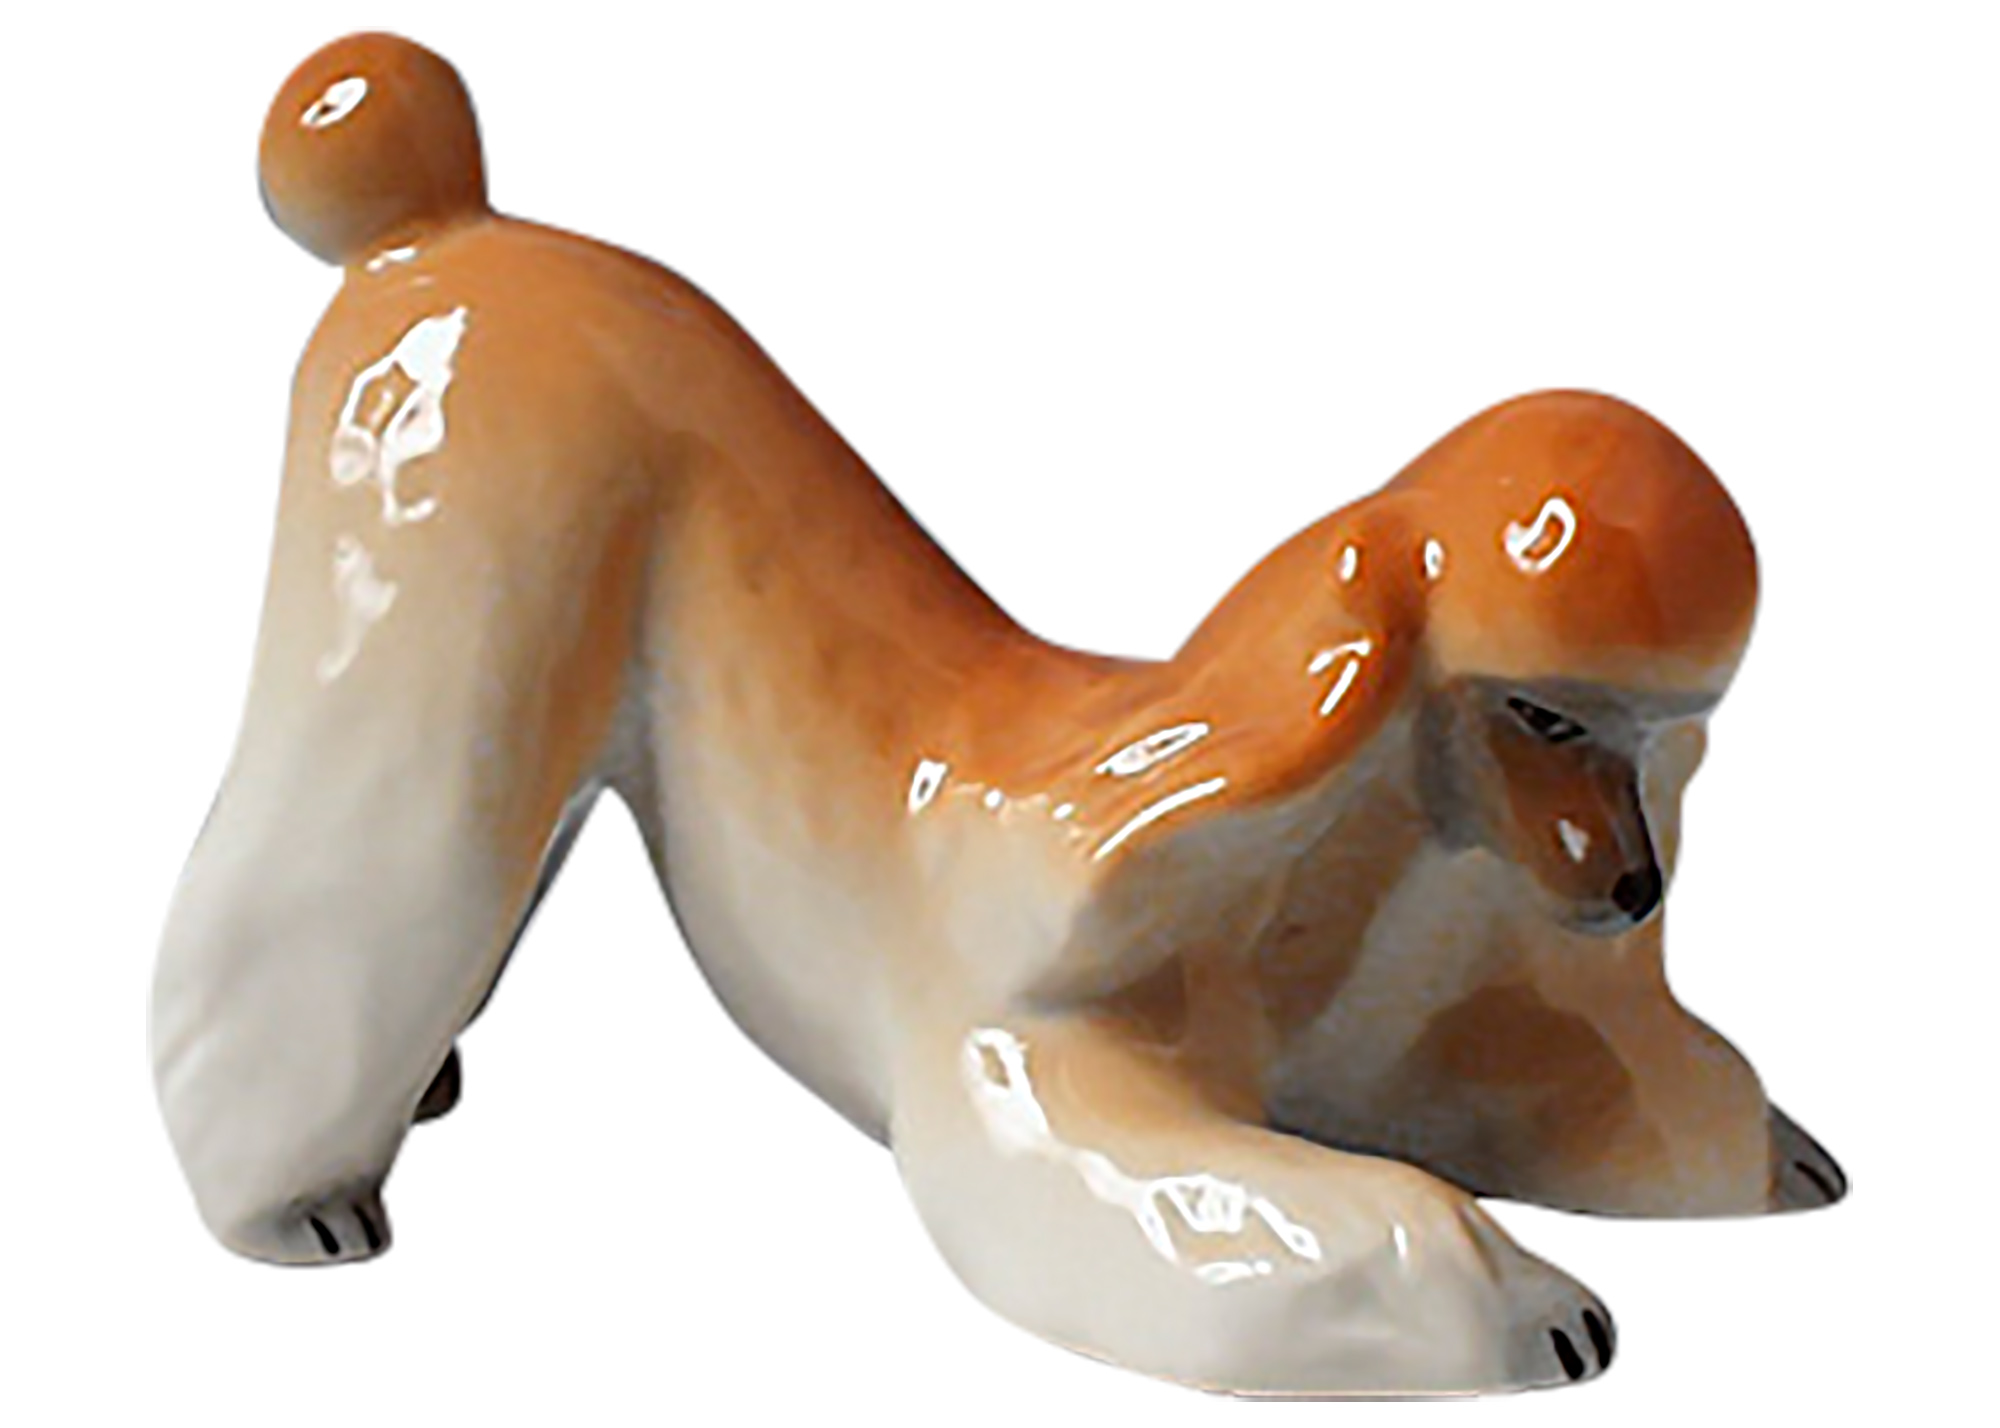 Buy Playing Apricot Poodle Figurine at GoldenCockerel.com